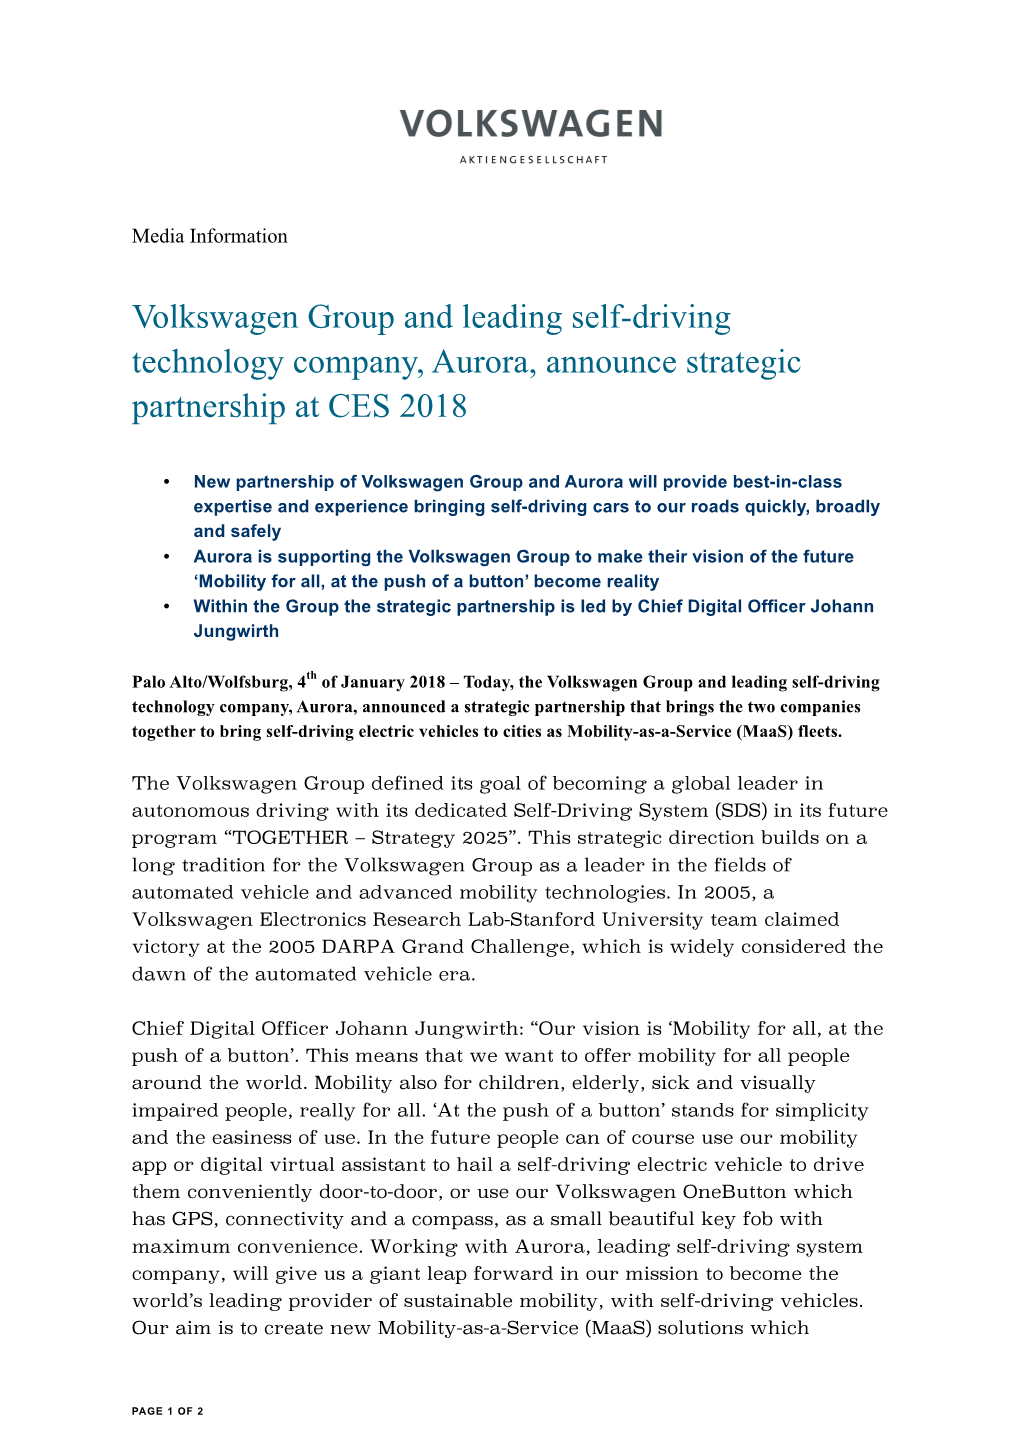 Volkswagen Group and Leading Self-Driving Technology Company